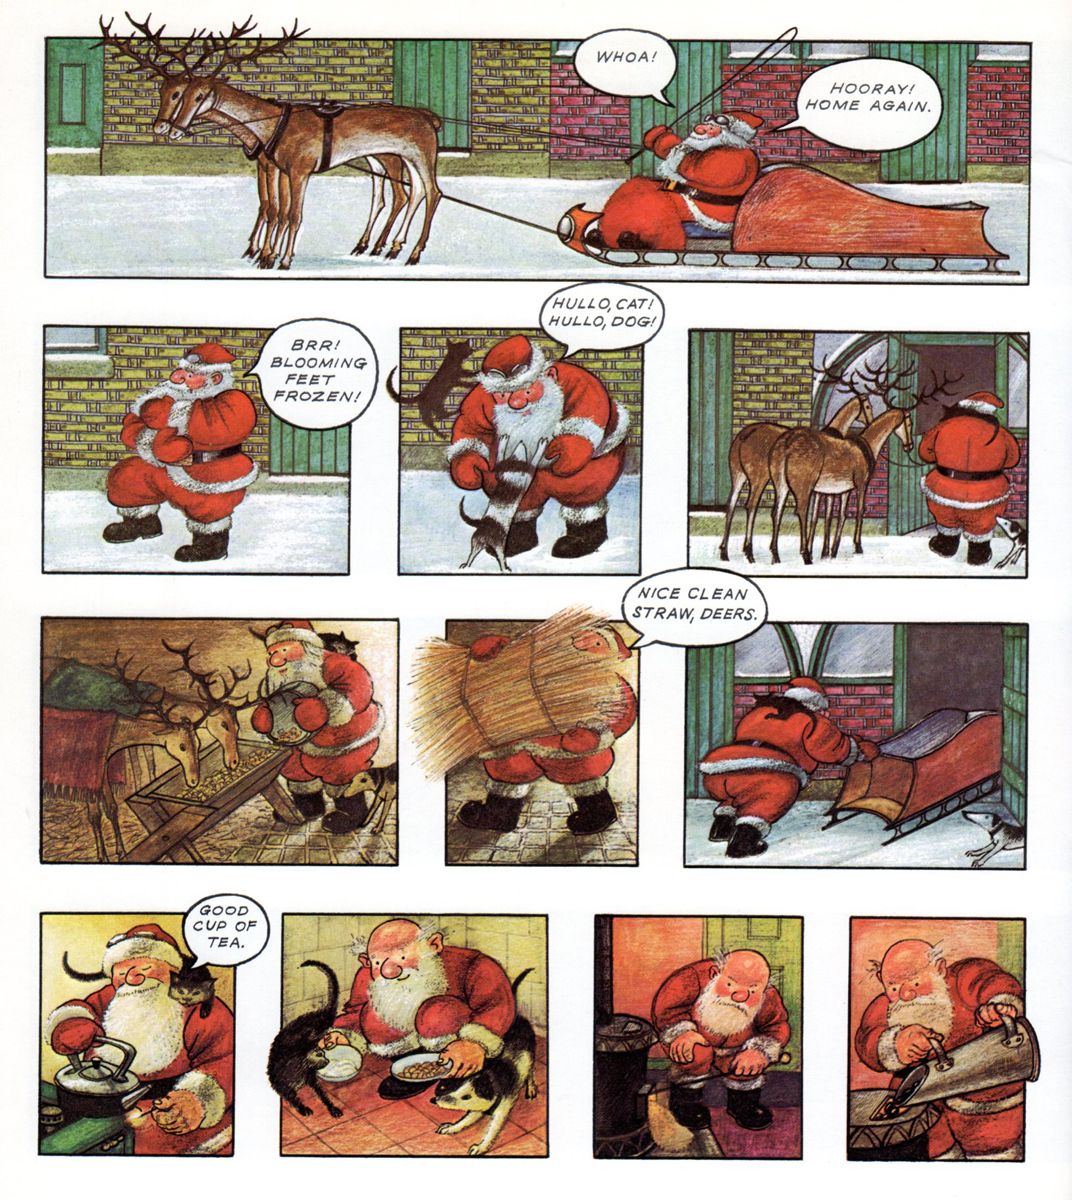 aw man RIP Raymond Briggs. The Father Christmas books have always been something special. 